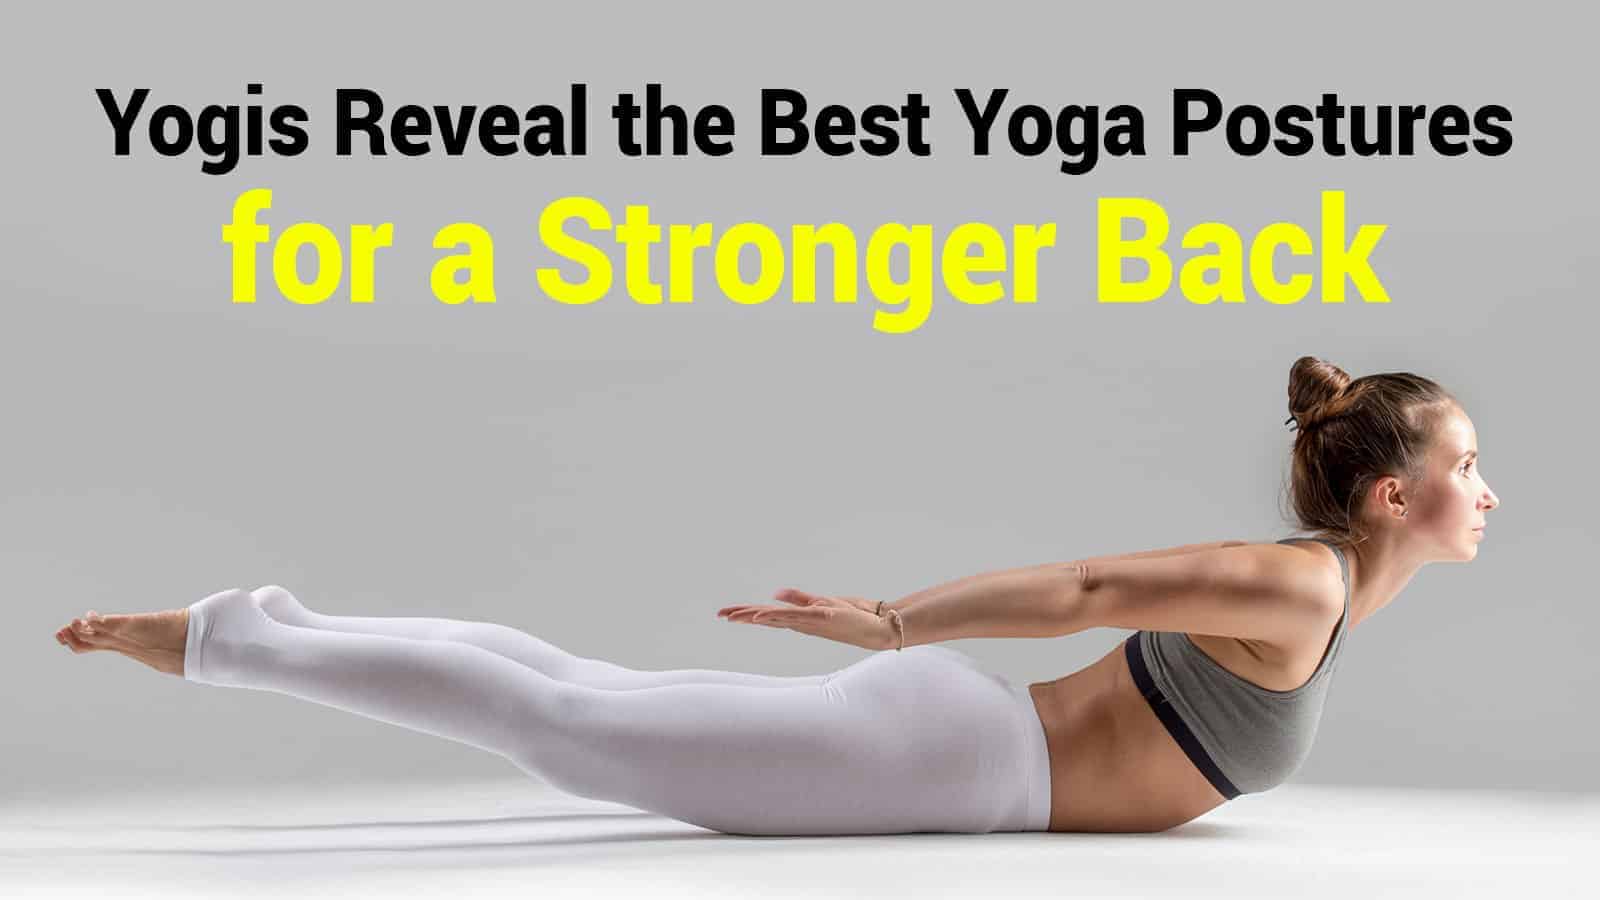 Yogis Reveal the Best Yoga Postures for a Stronger Back